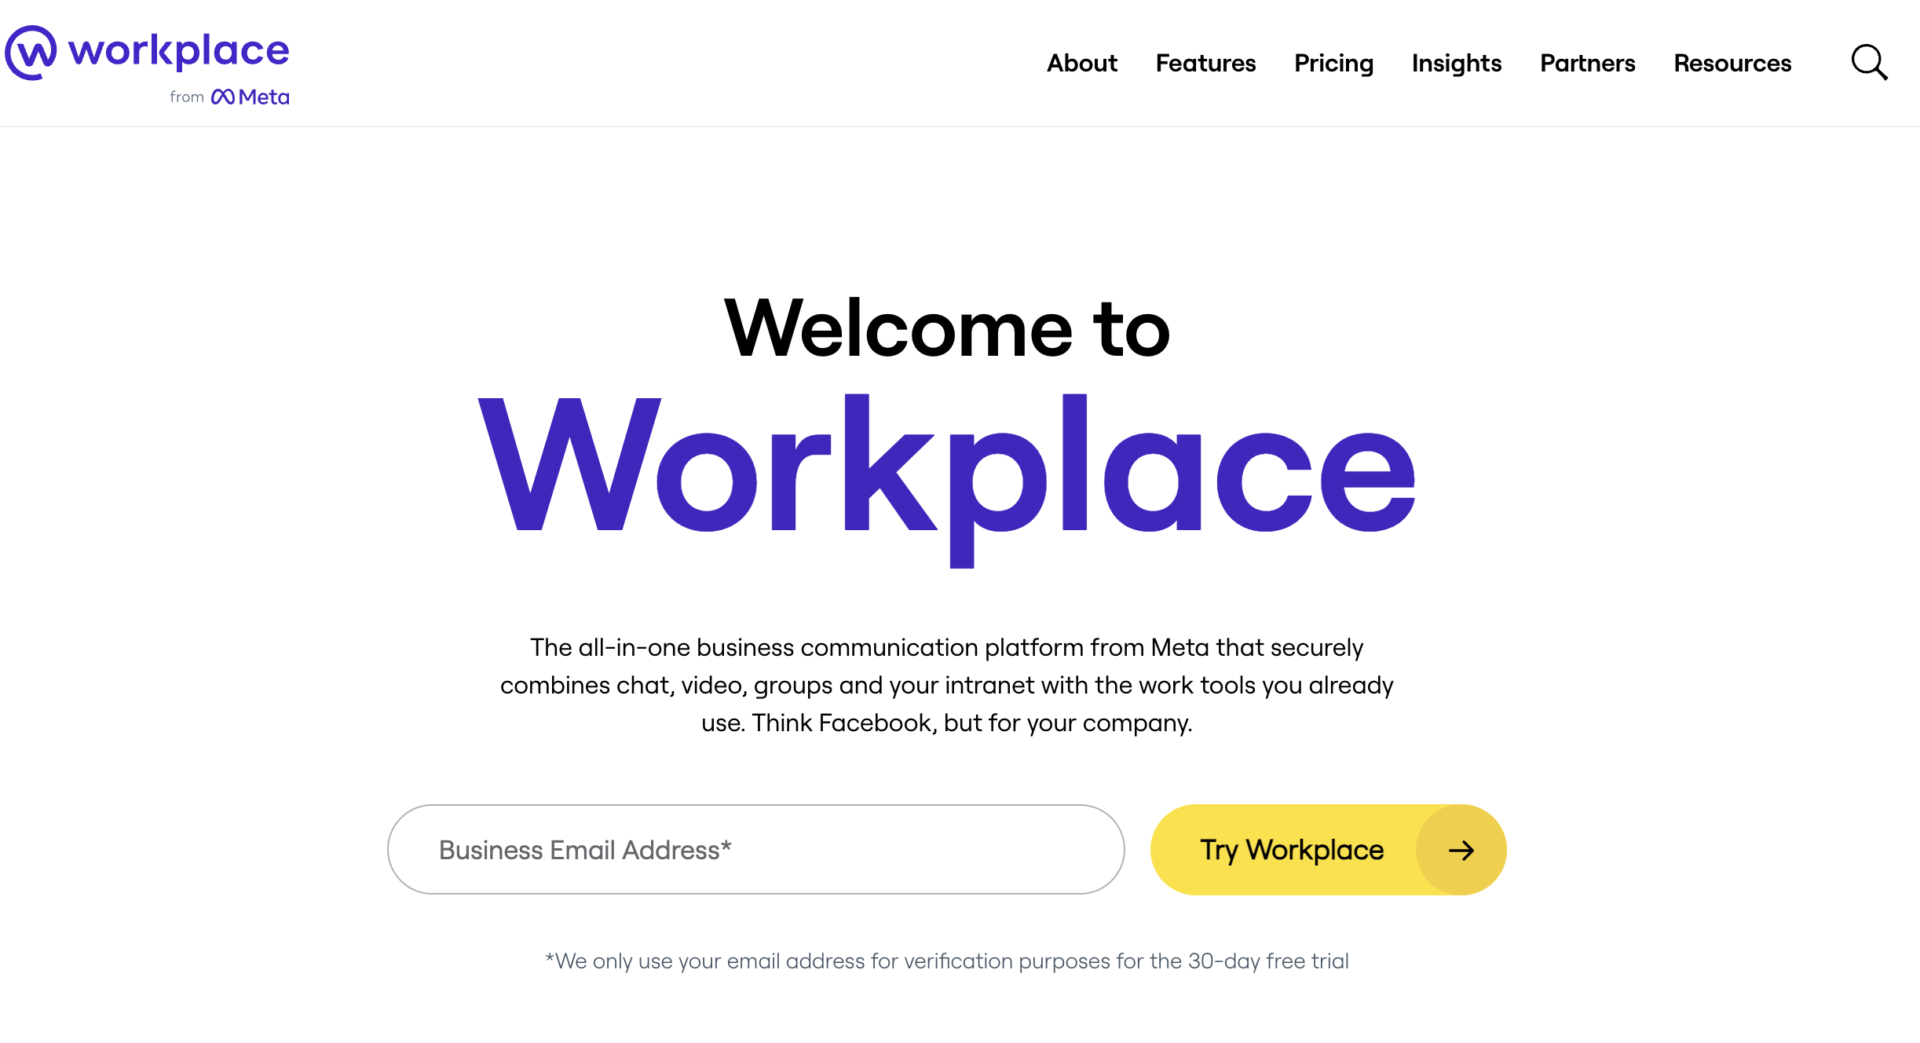 Top page of Workplaceby Meta